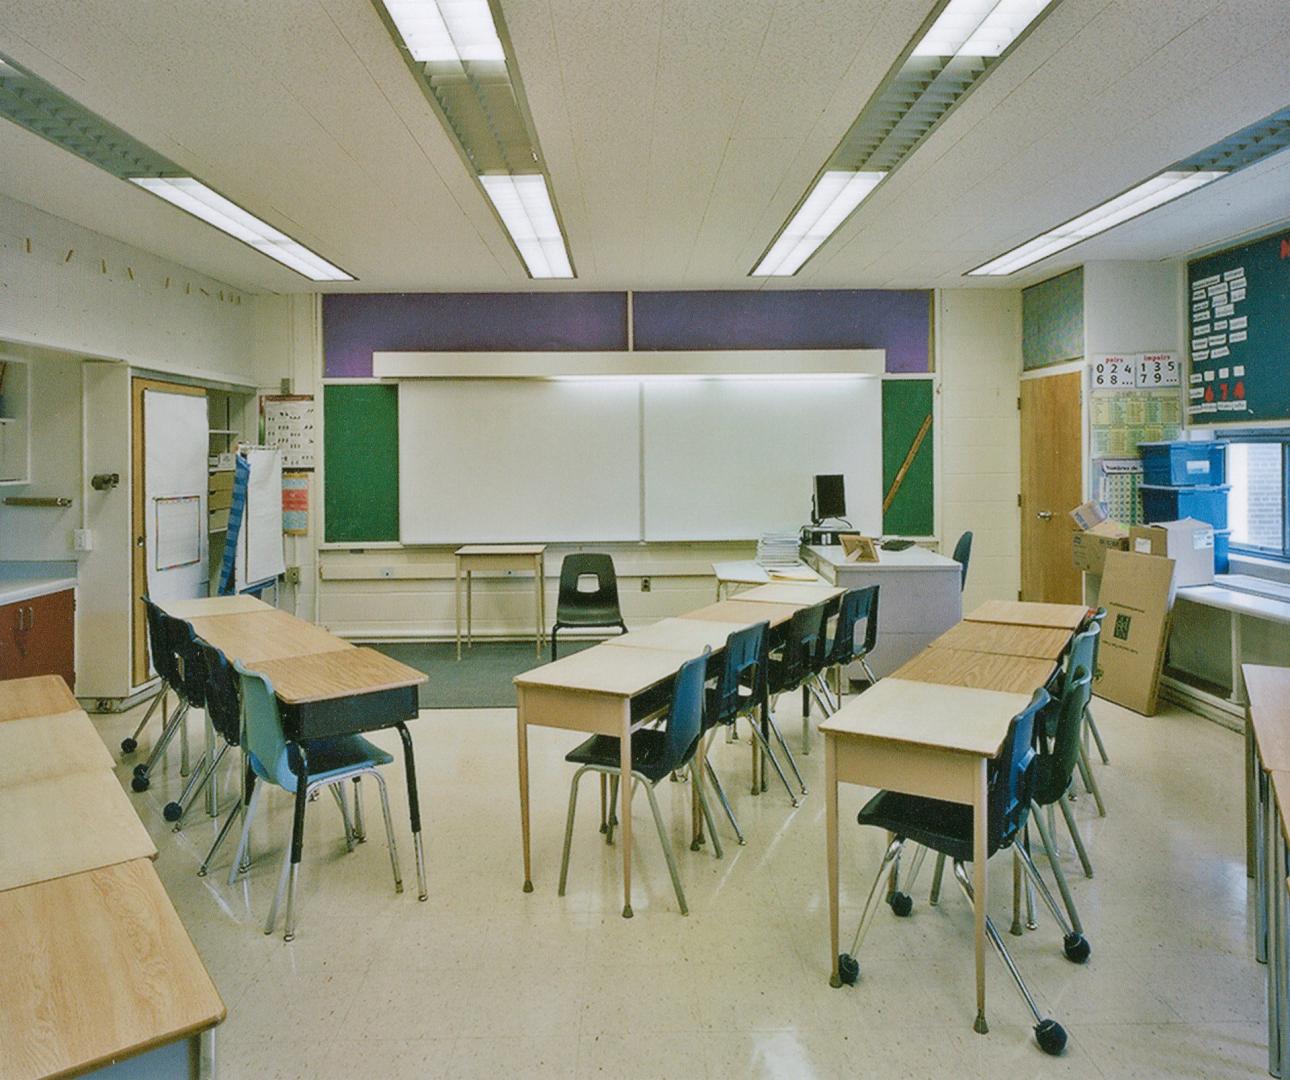 A photograph of a classroom, with desks, chairs and a whiteboard.